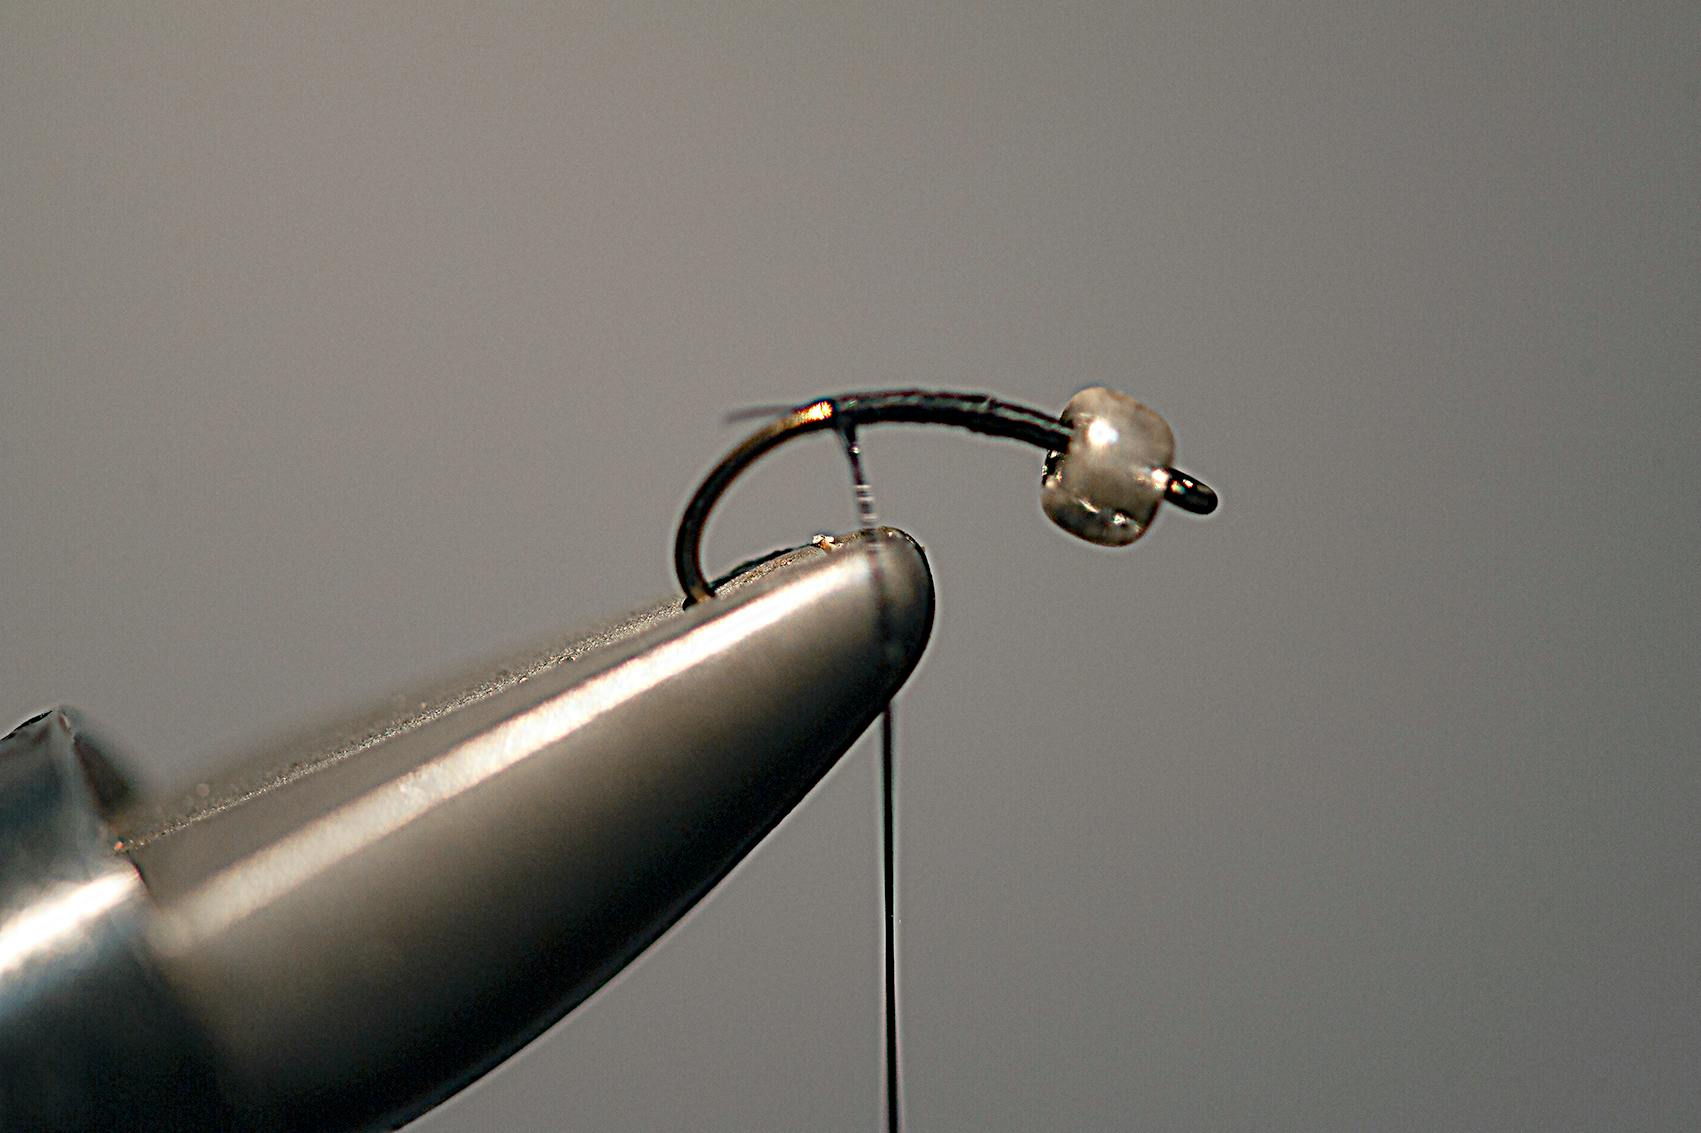 How to Tie Small Flies